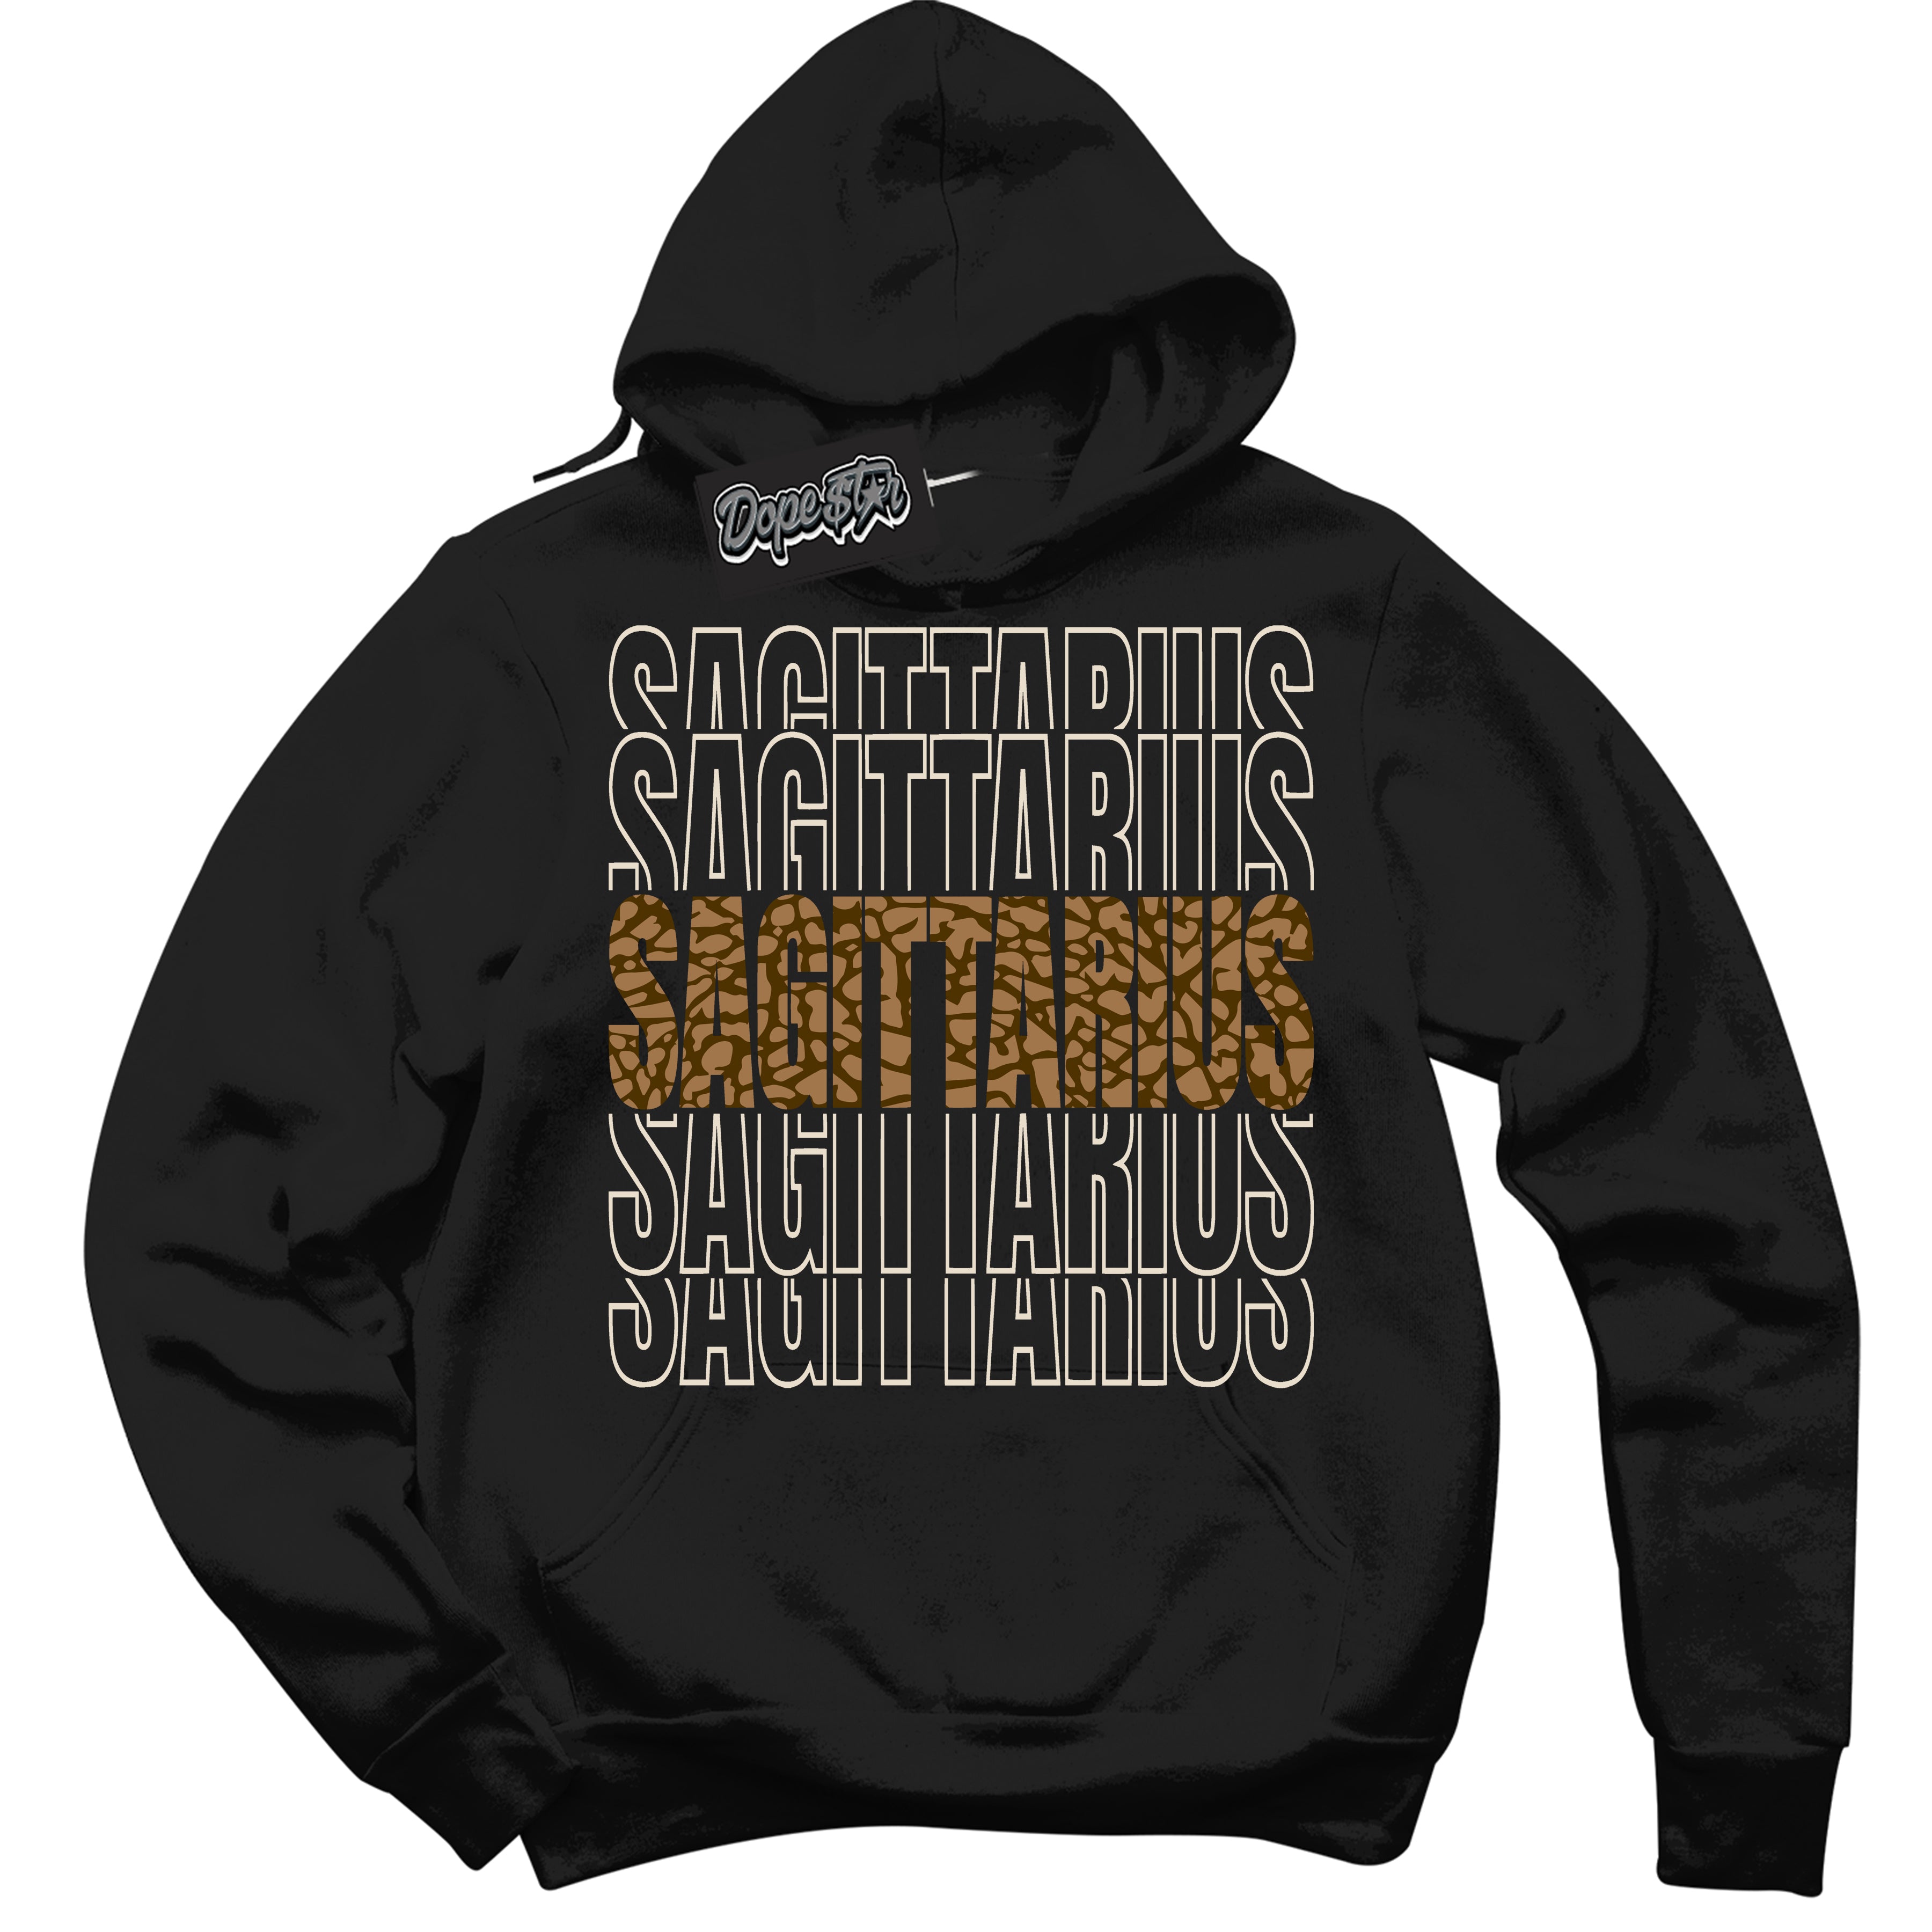 Cool Black Graphic DopeStar Hoodie with “ Sagittarius “ print, that perfectly matches Palomino 3s sneakers